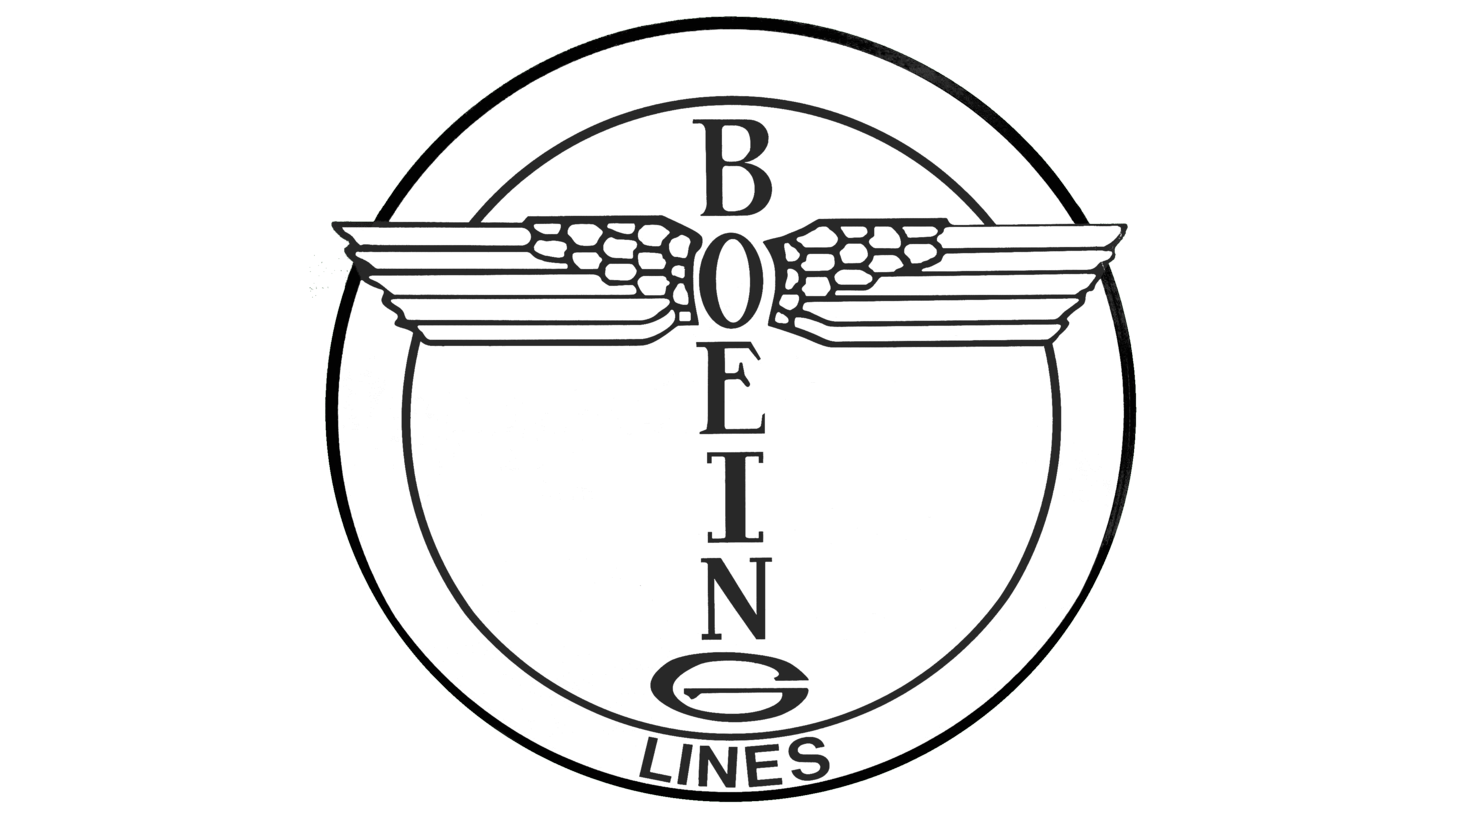 Boeing sign 1930 1940